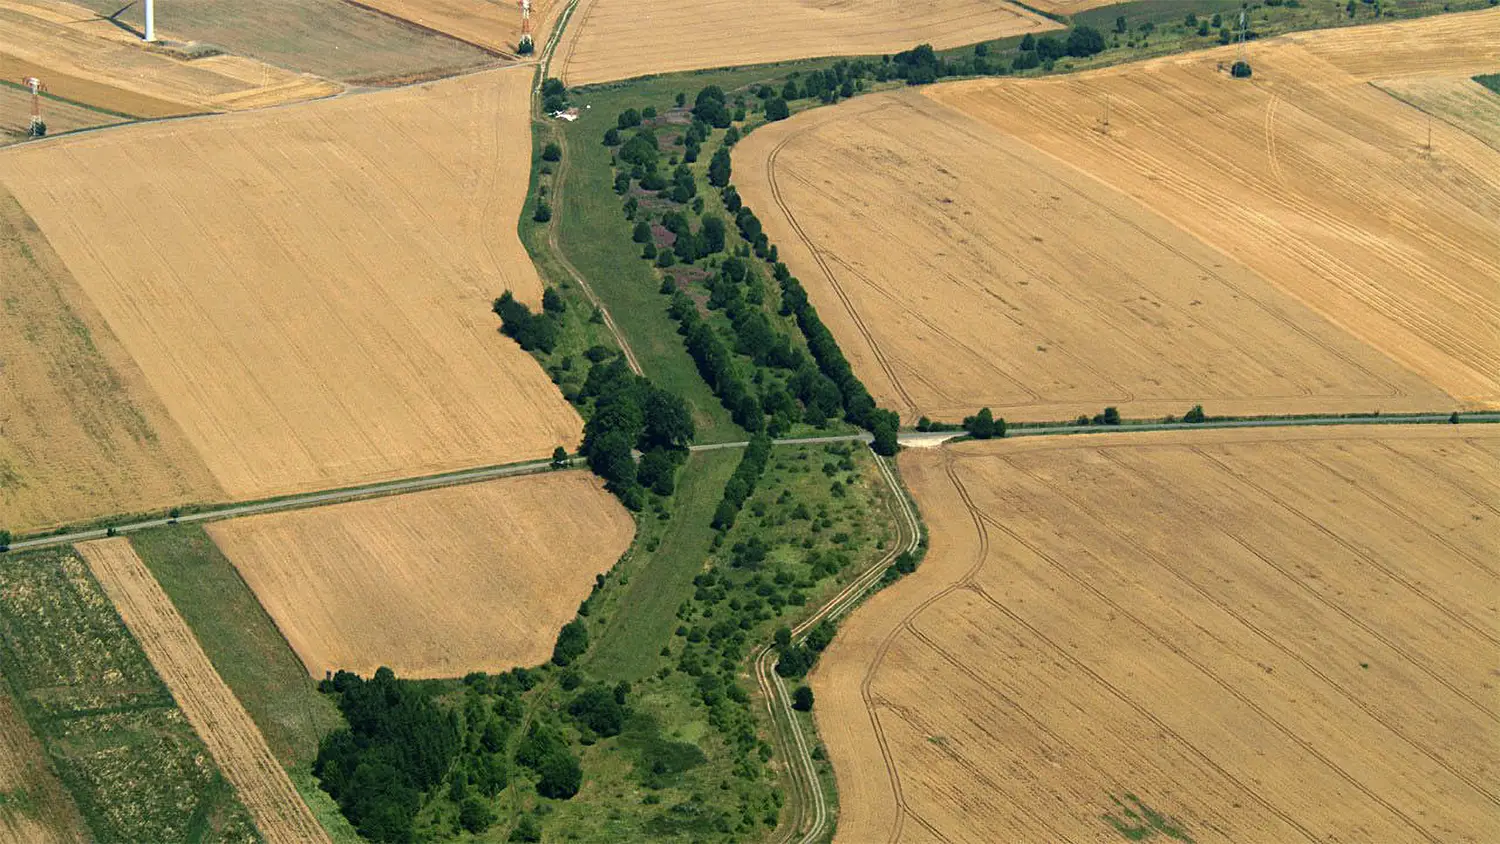 Yellow agricultural fields are separated by a jagged strip of green: the grass and trees that make up the greenbelt.